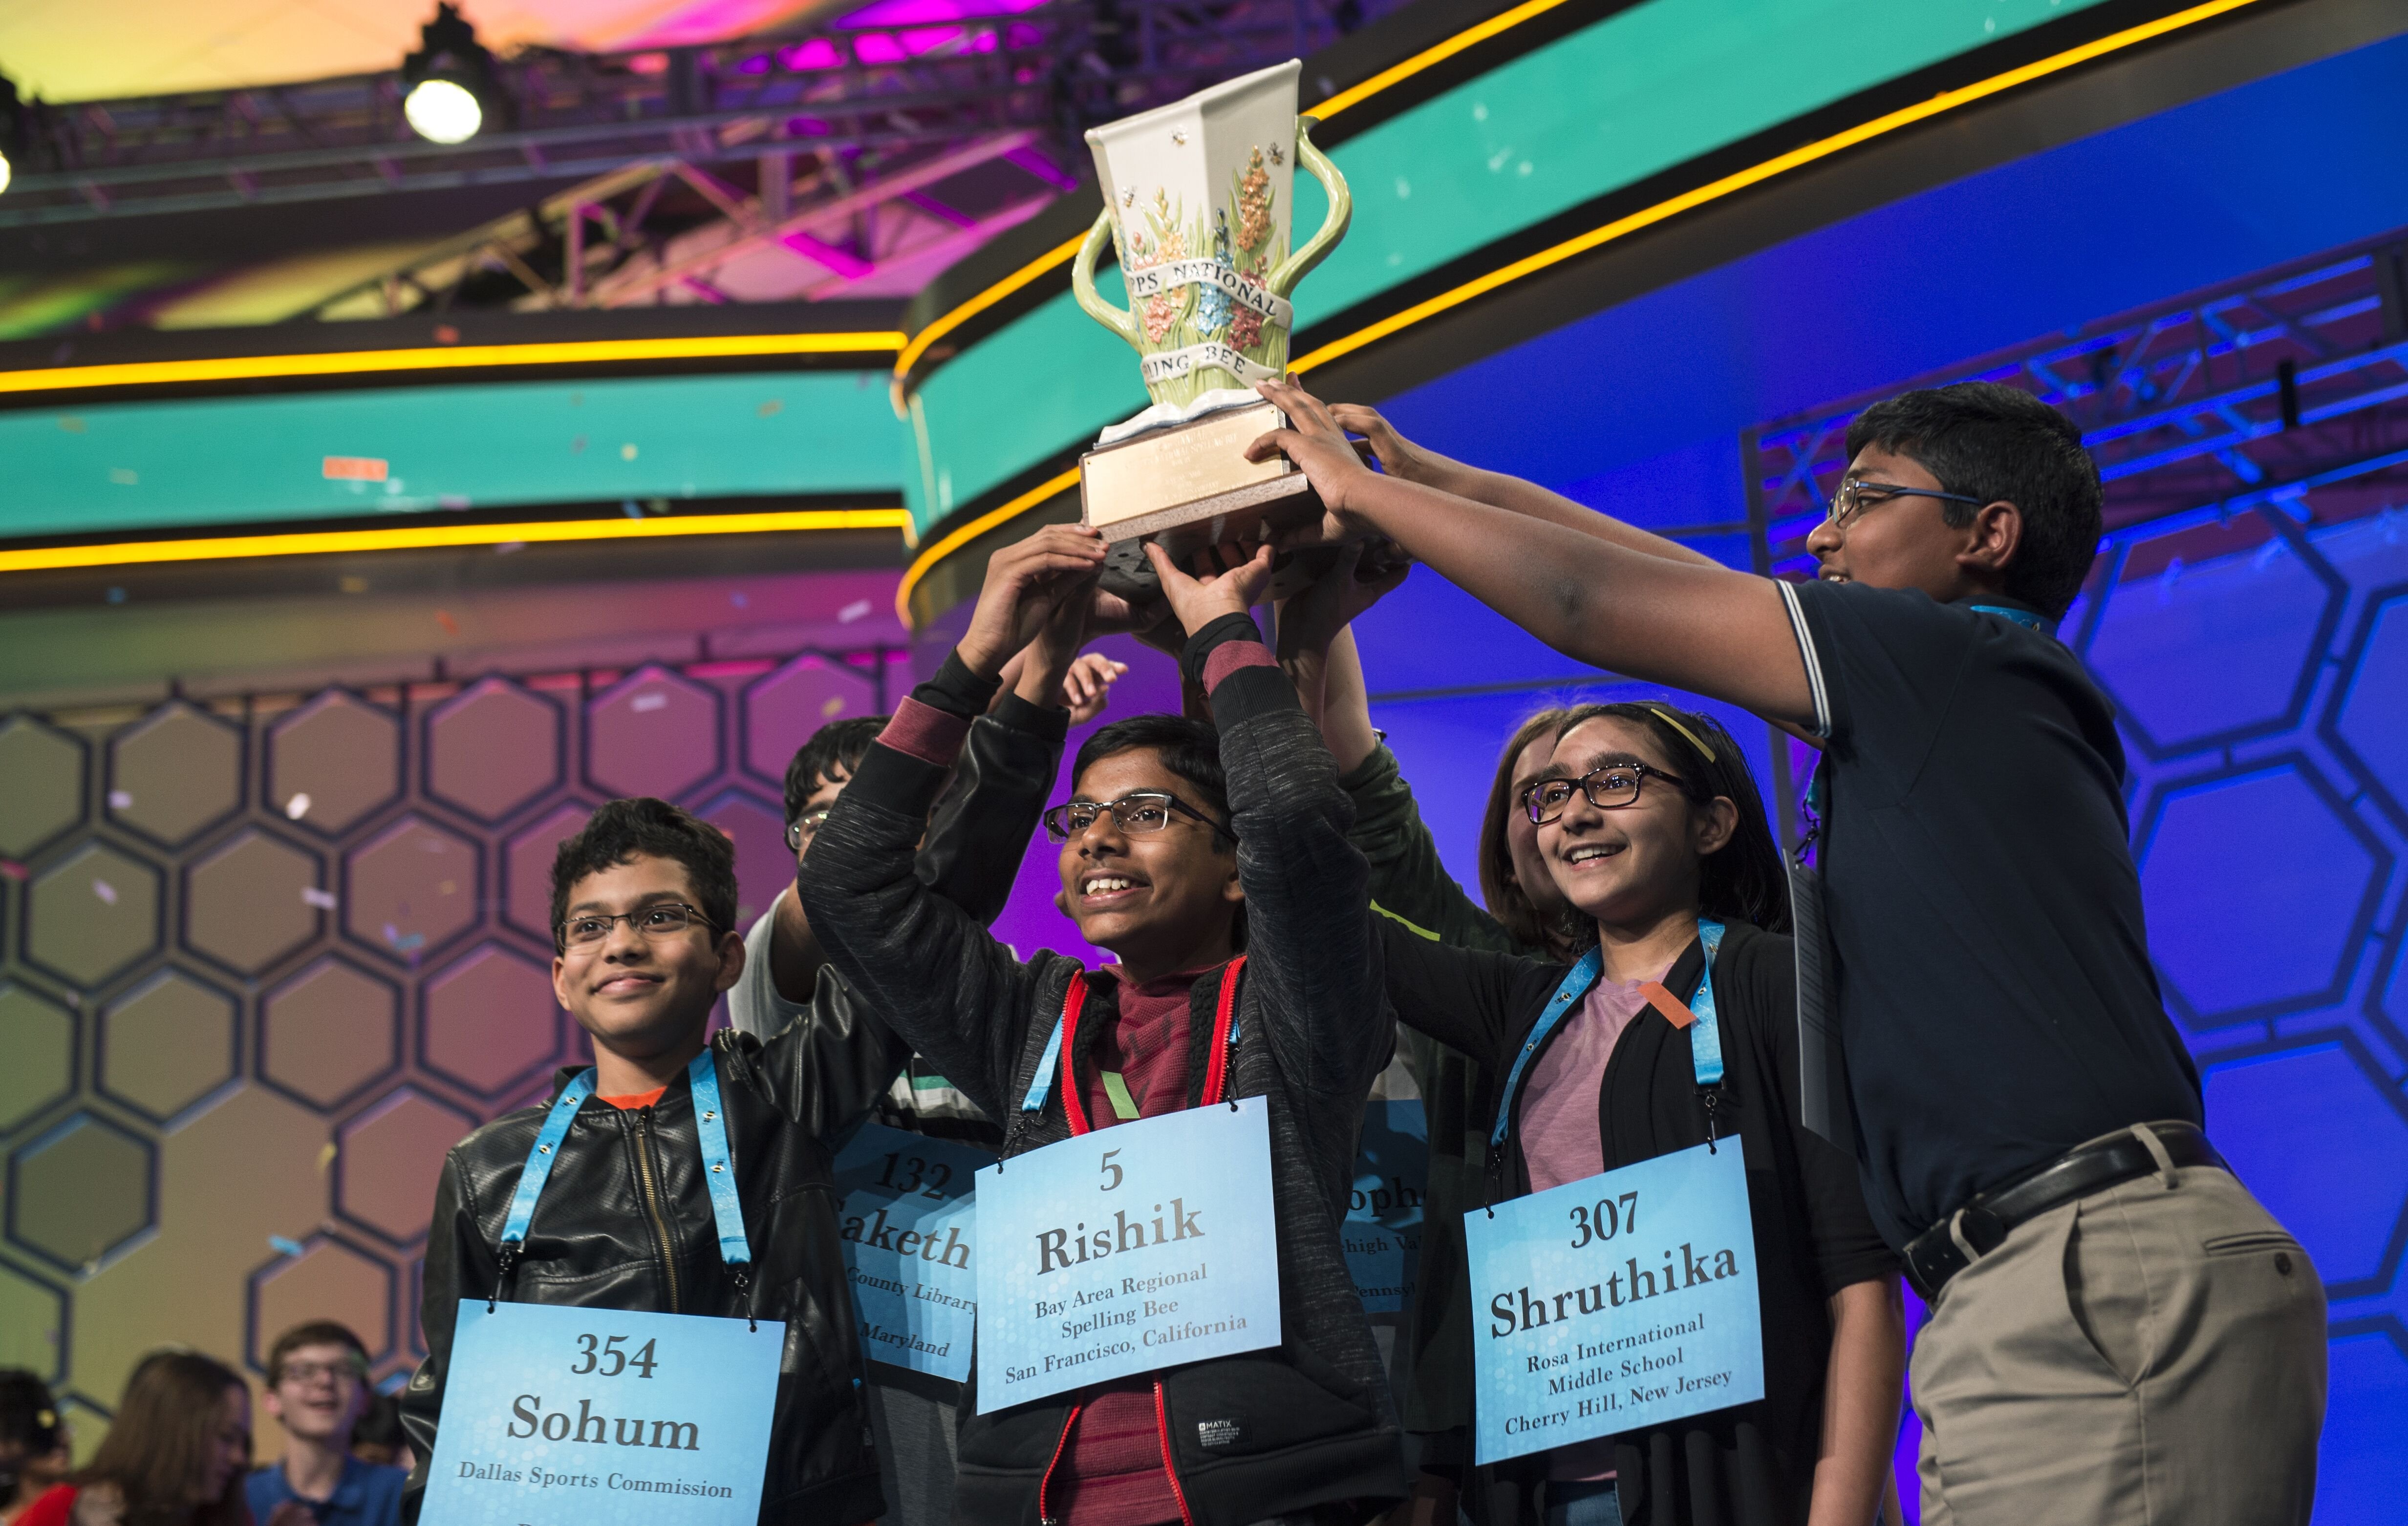 The eight co-champions celebrate after winning the Scripps National Spelling Bee on Thursday May 30, 2019 in Oxon Hill, Md | Photo: Getty Images